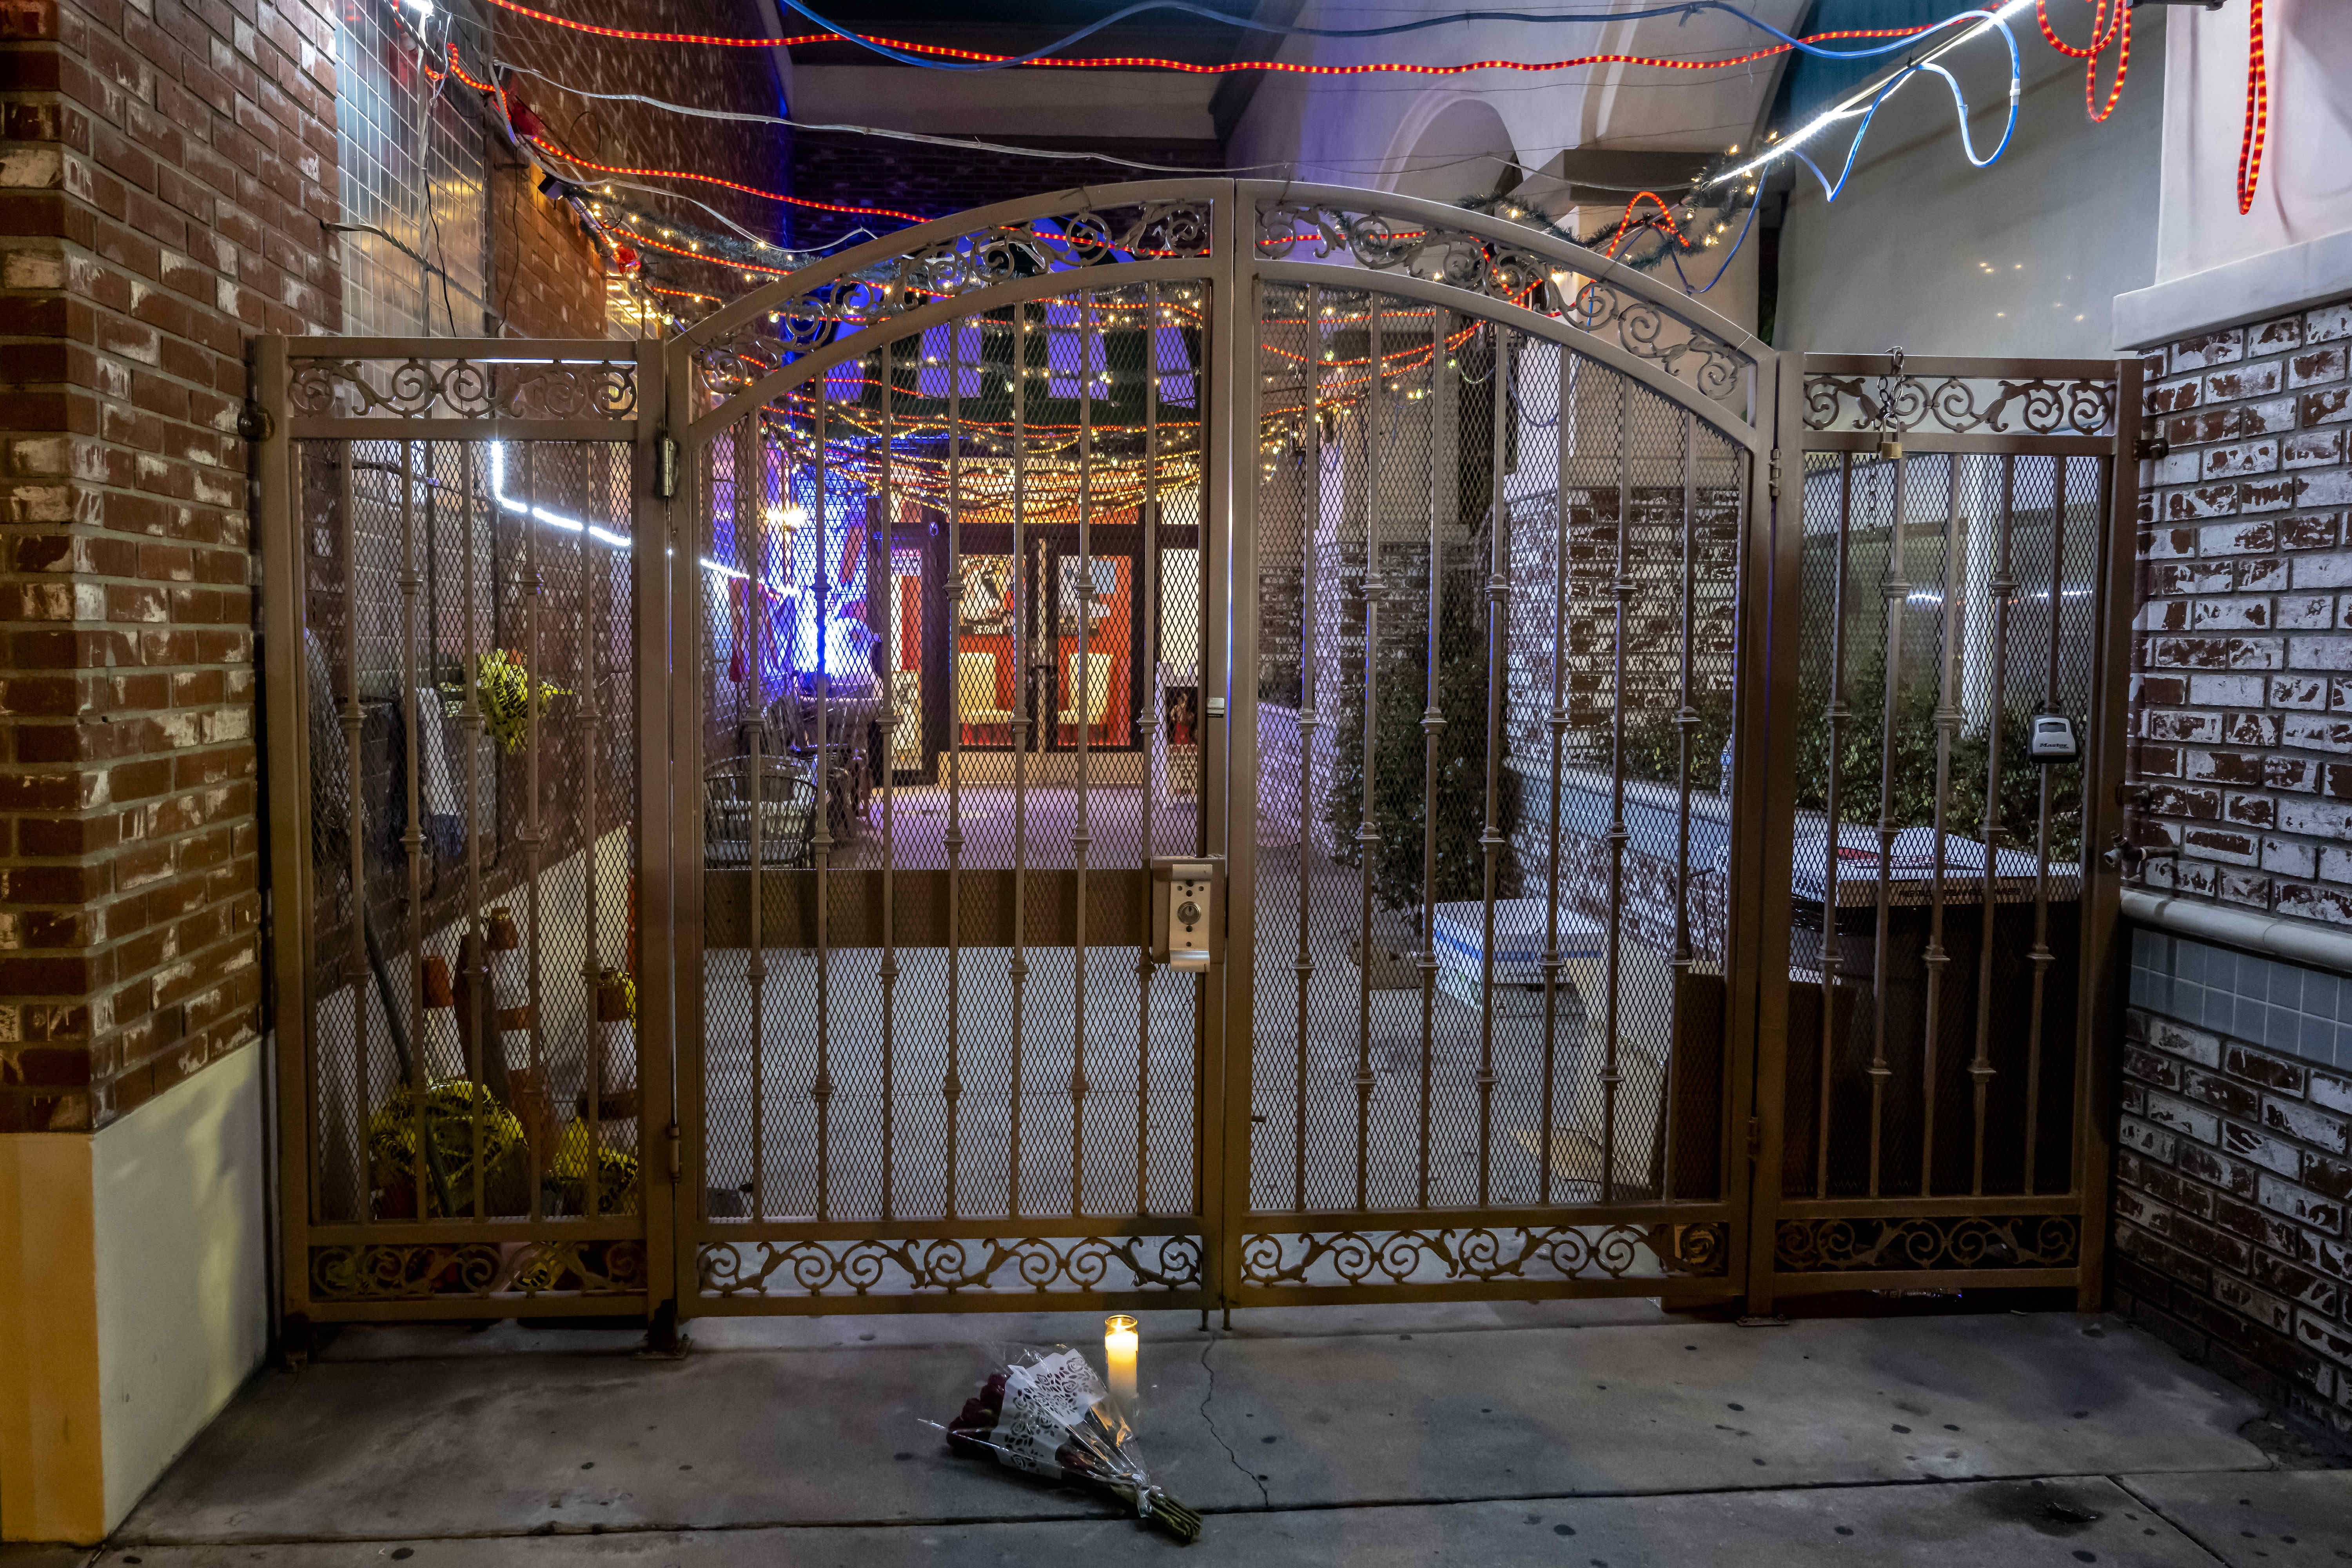  Flowers and a candle were placed at the entrance to the Star Ballroom Dance Studio after police took down the crime scene tape in Monterey Park on Sunday, January 22.